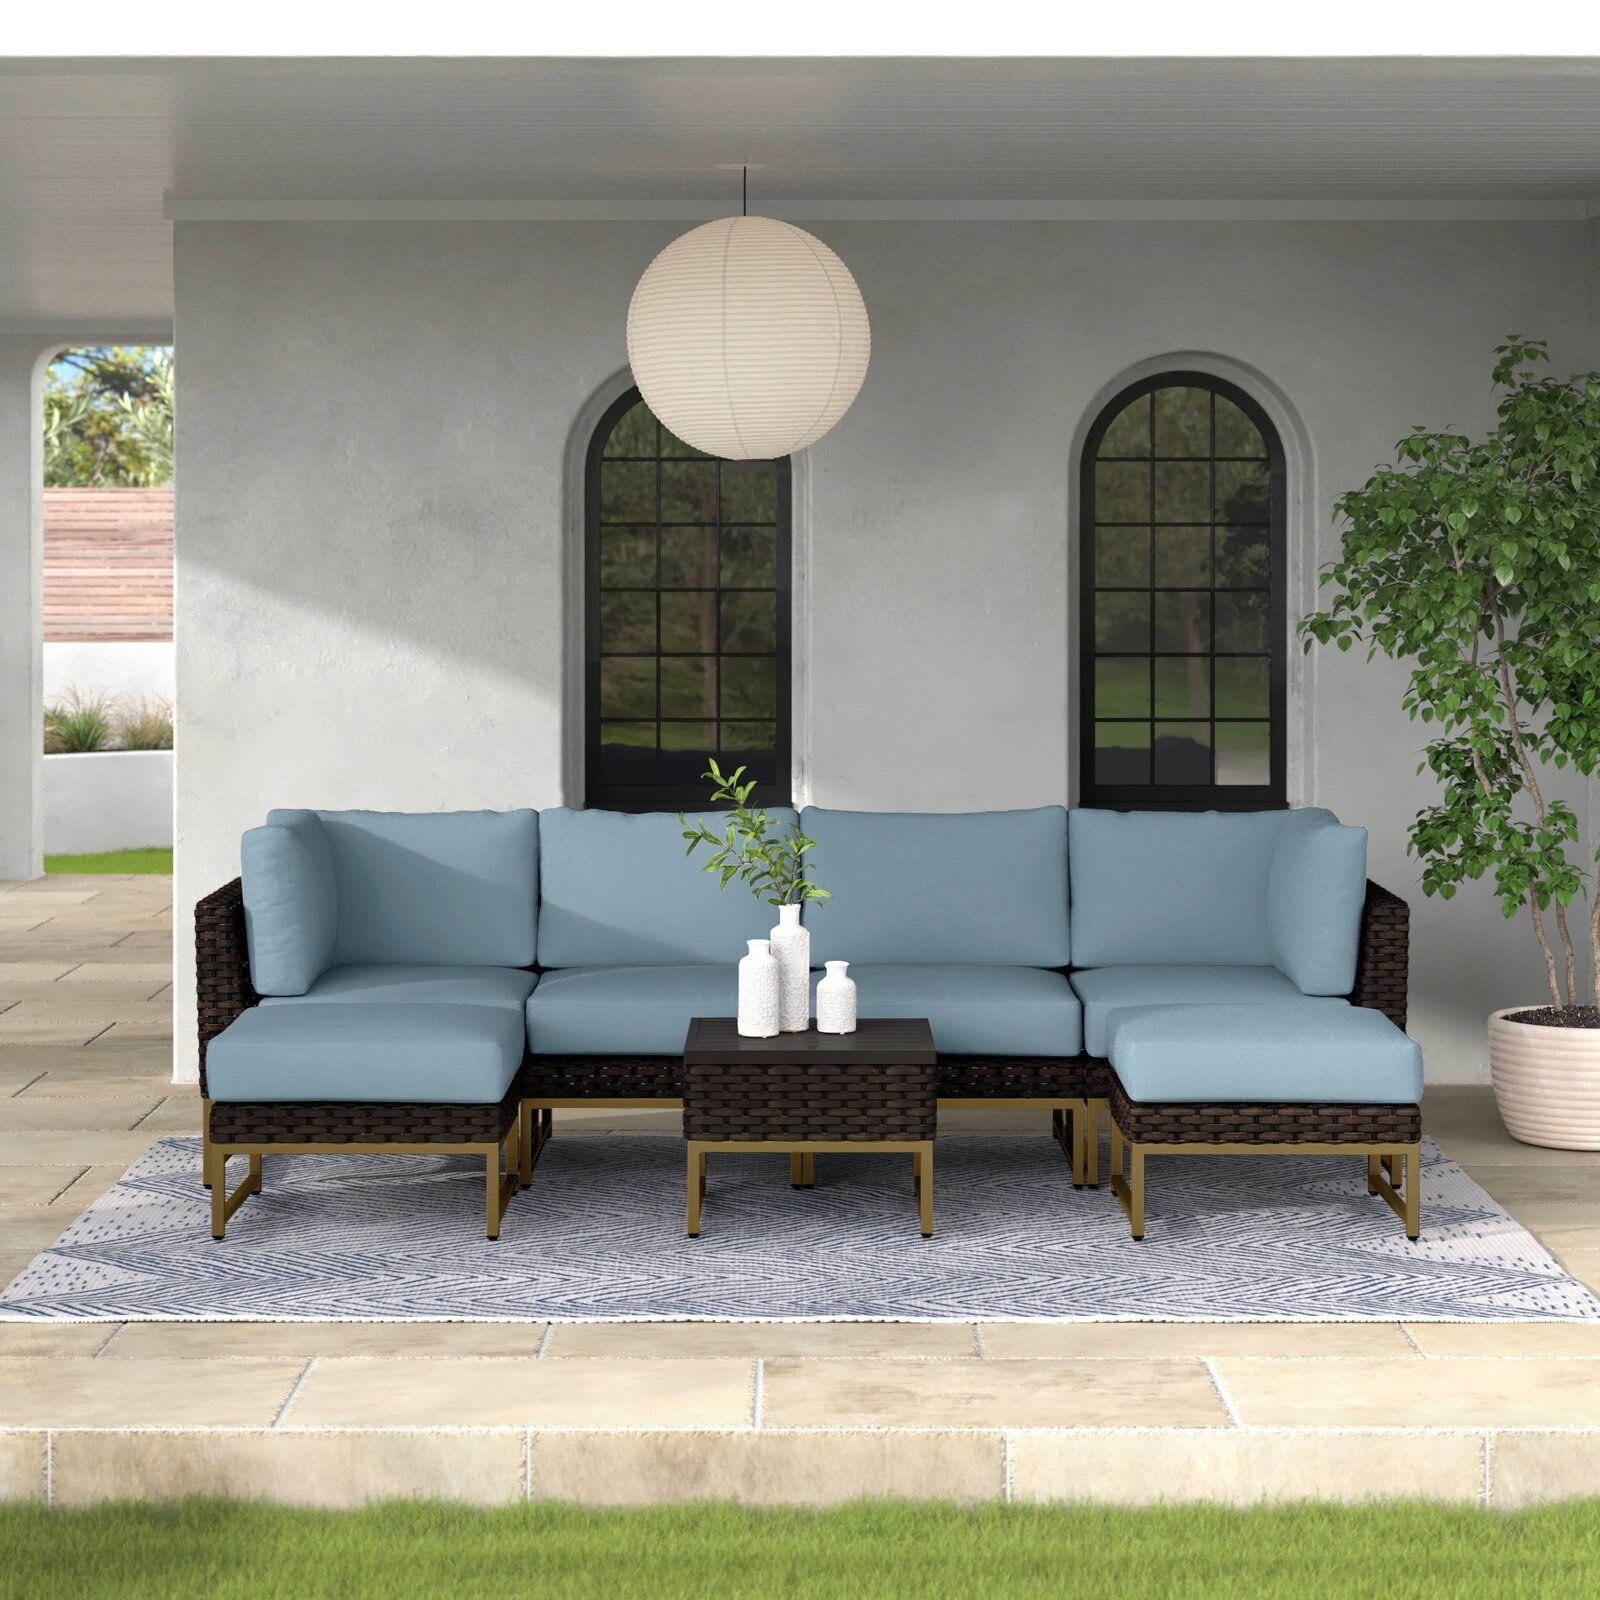 six seat wicker couch with blue cushions on a patio